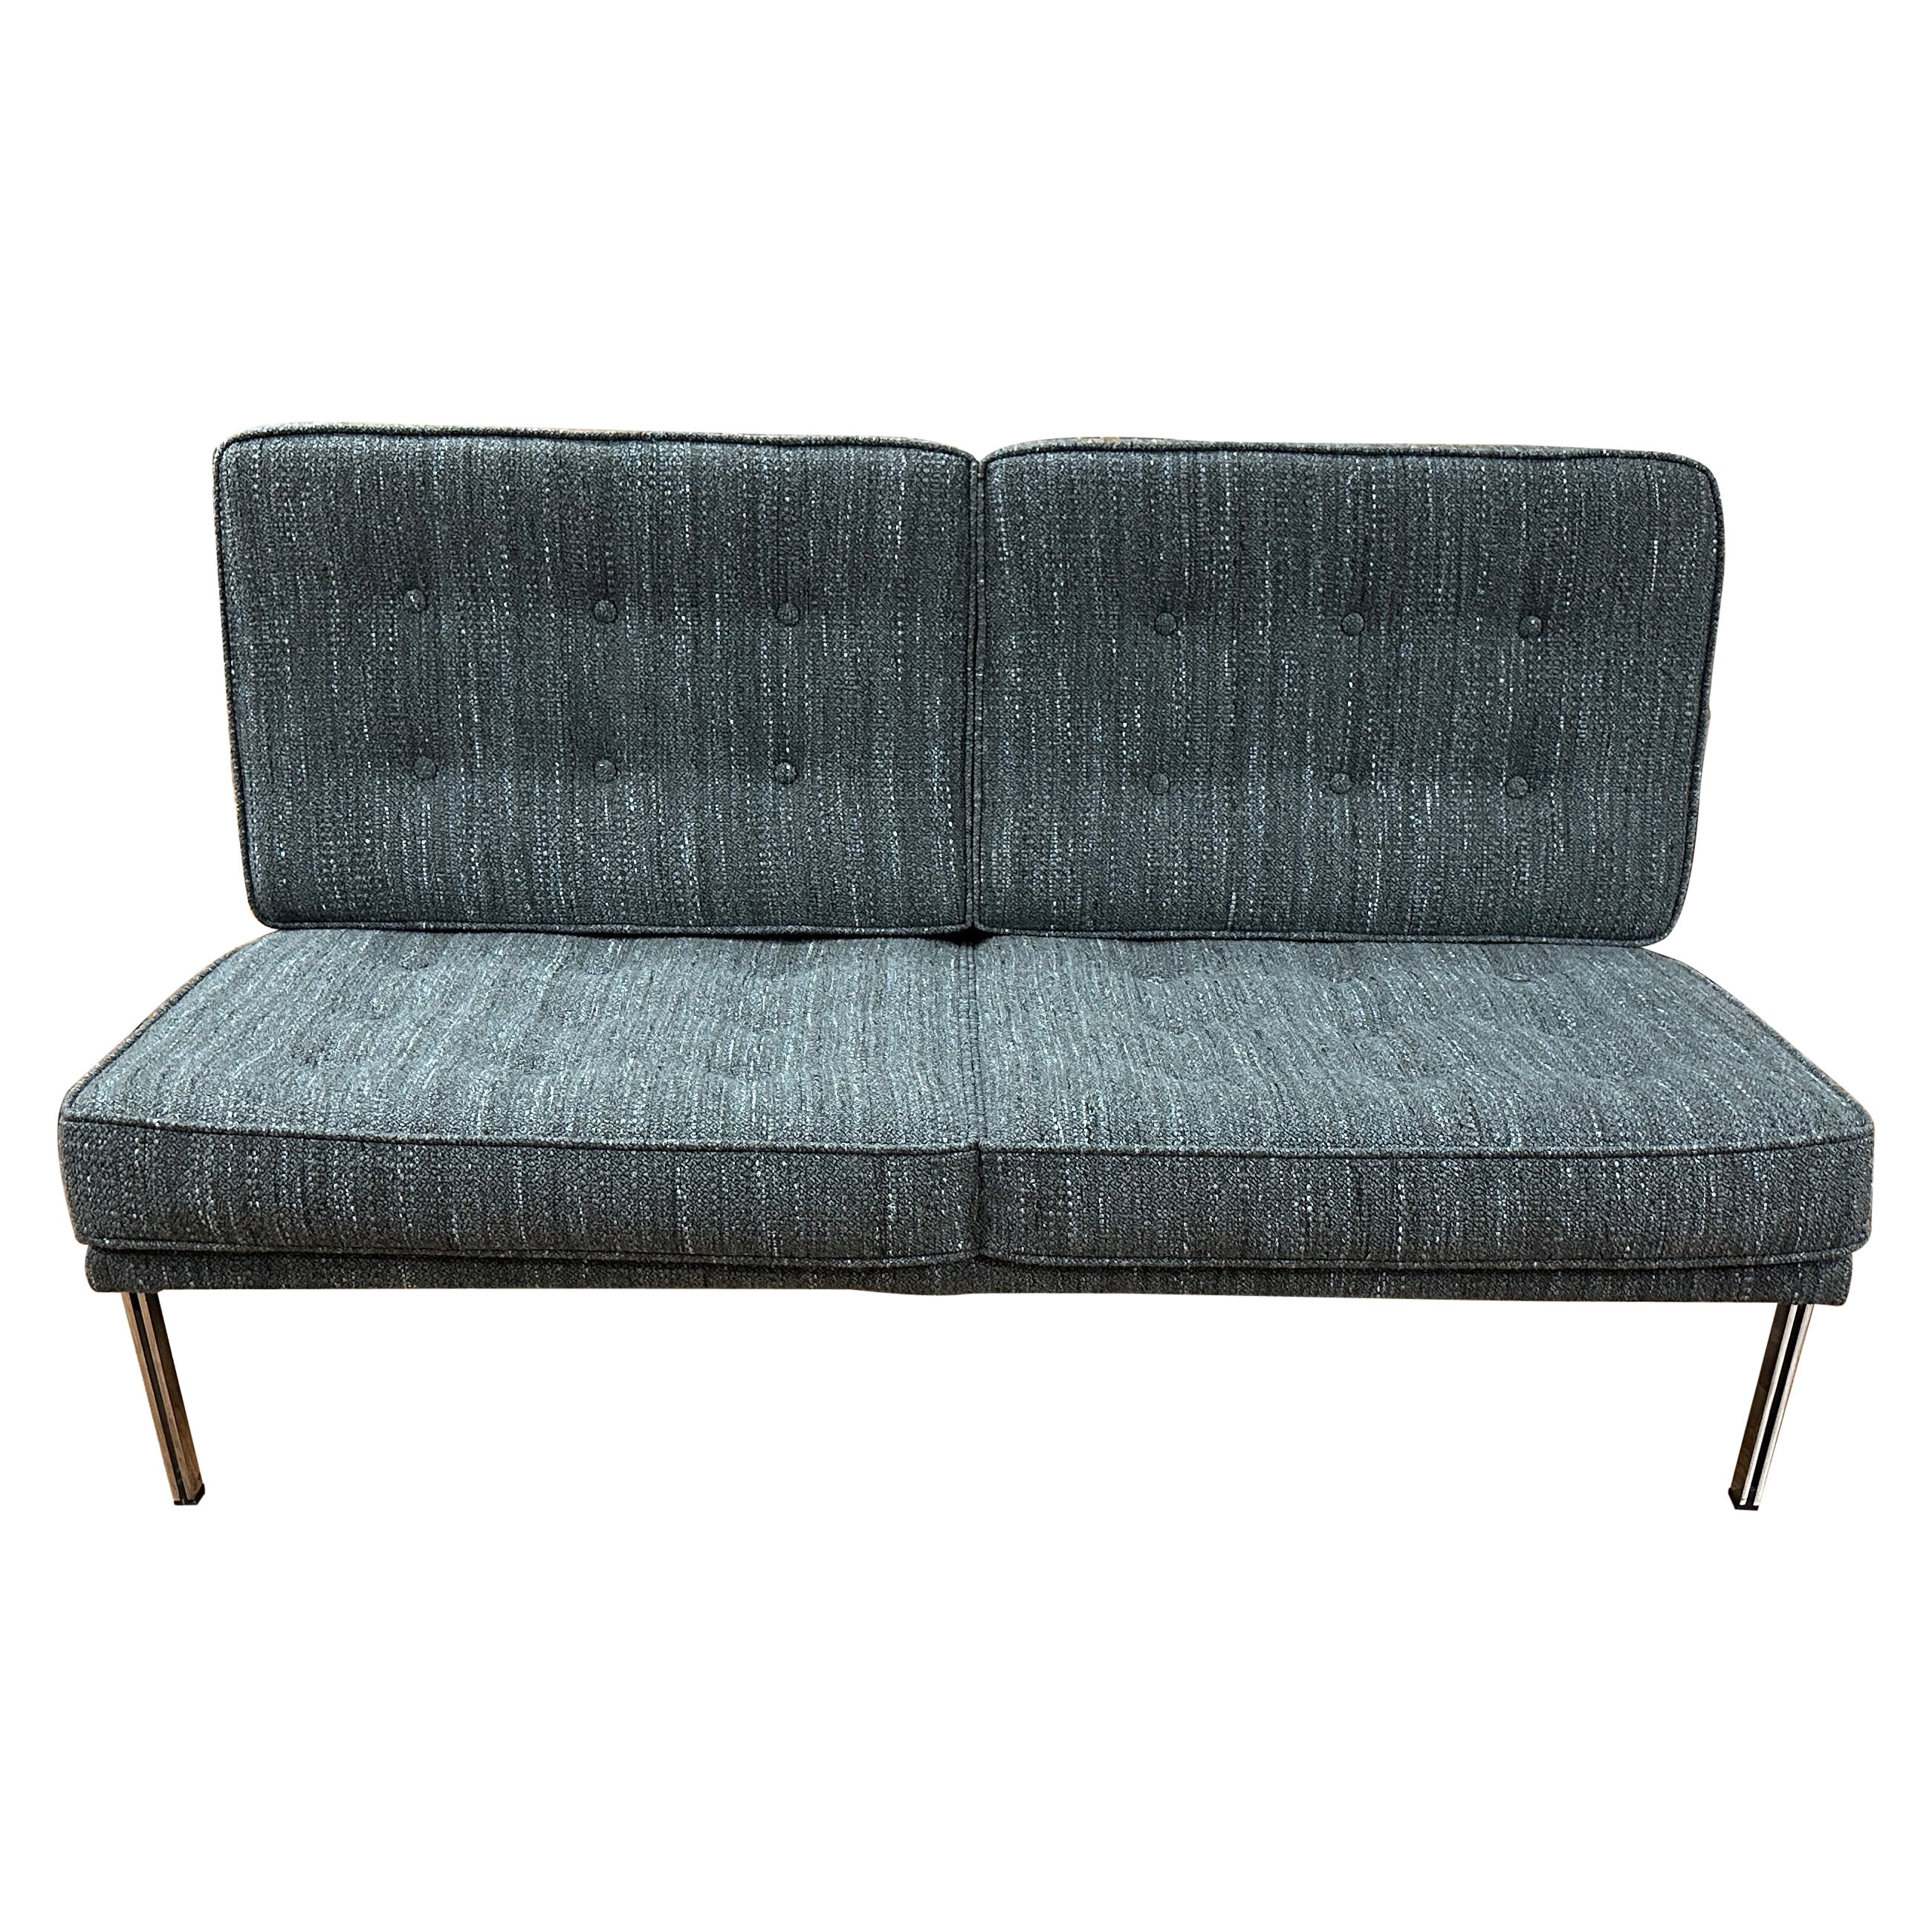 Knoll Parallel Bar Sofa Re-Upholstered in Knoll Rivington Fabric